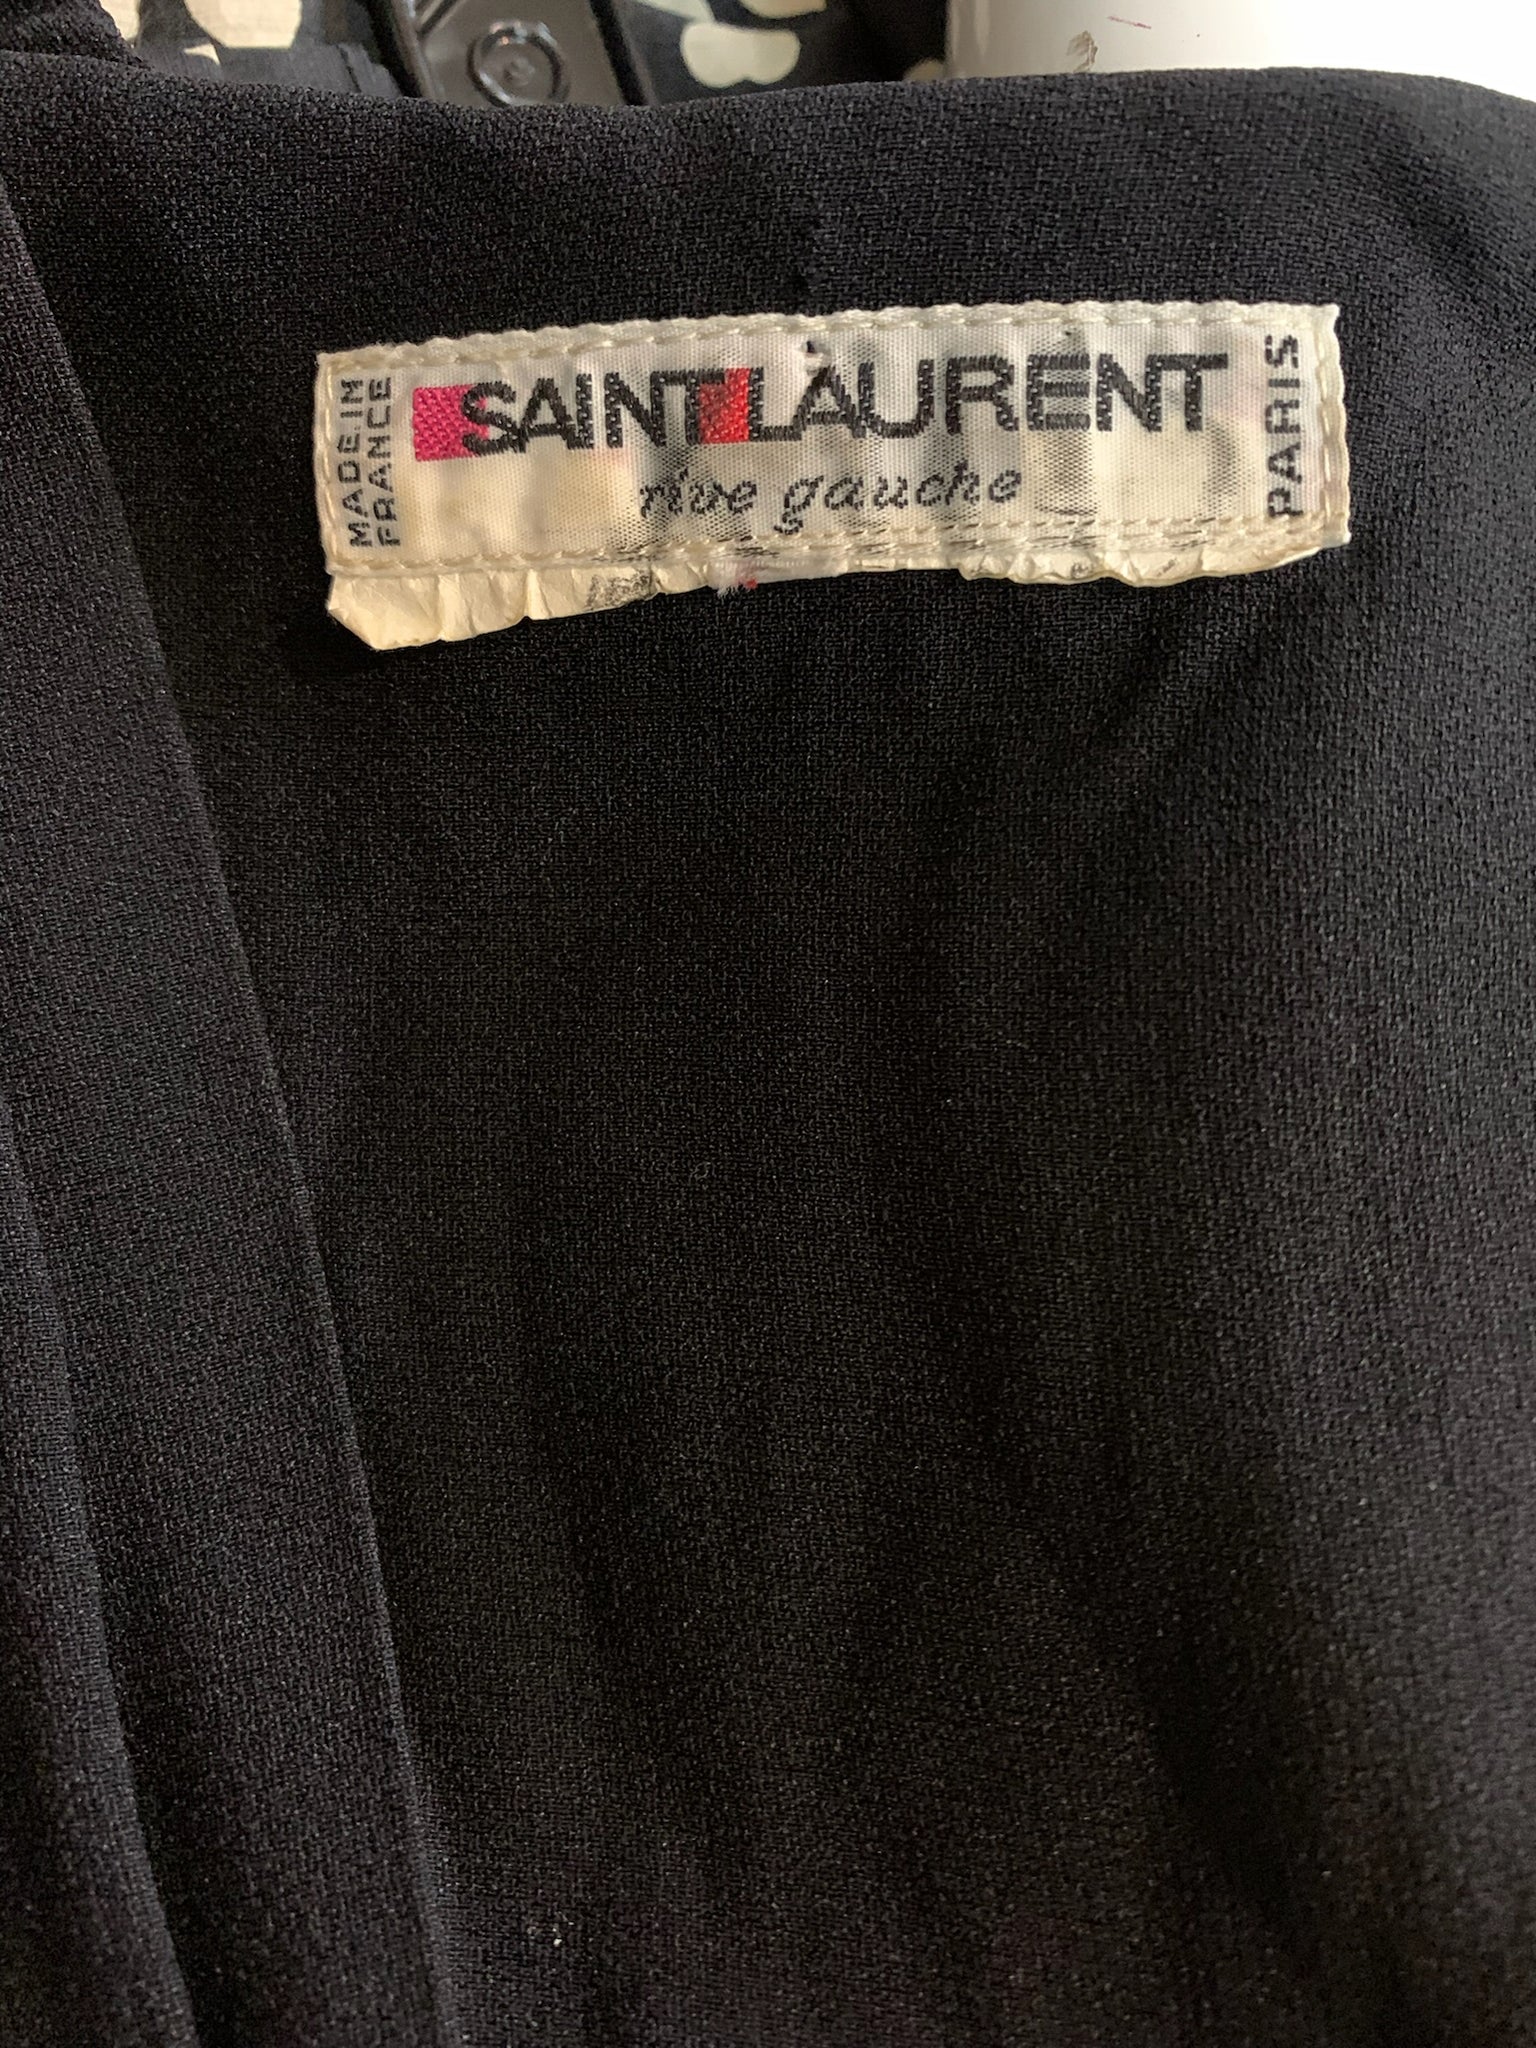  YSL Rive Gauche 80s Black Cocktail  Dress with Rhinestones LABEL 5 of 5